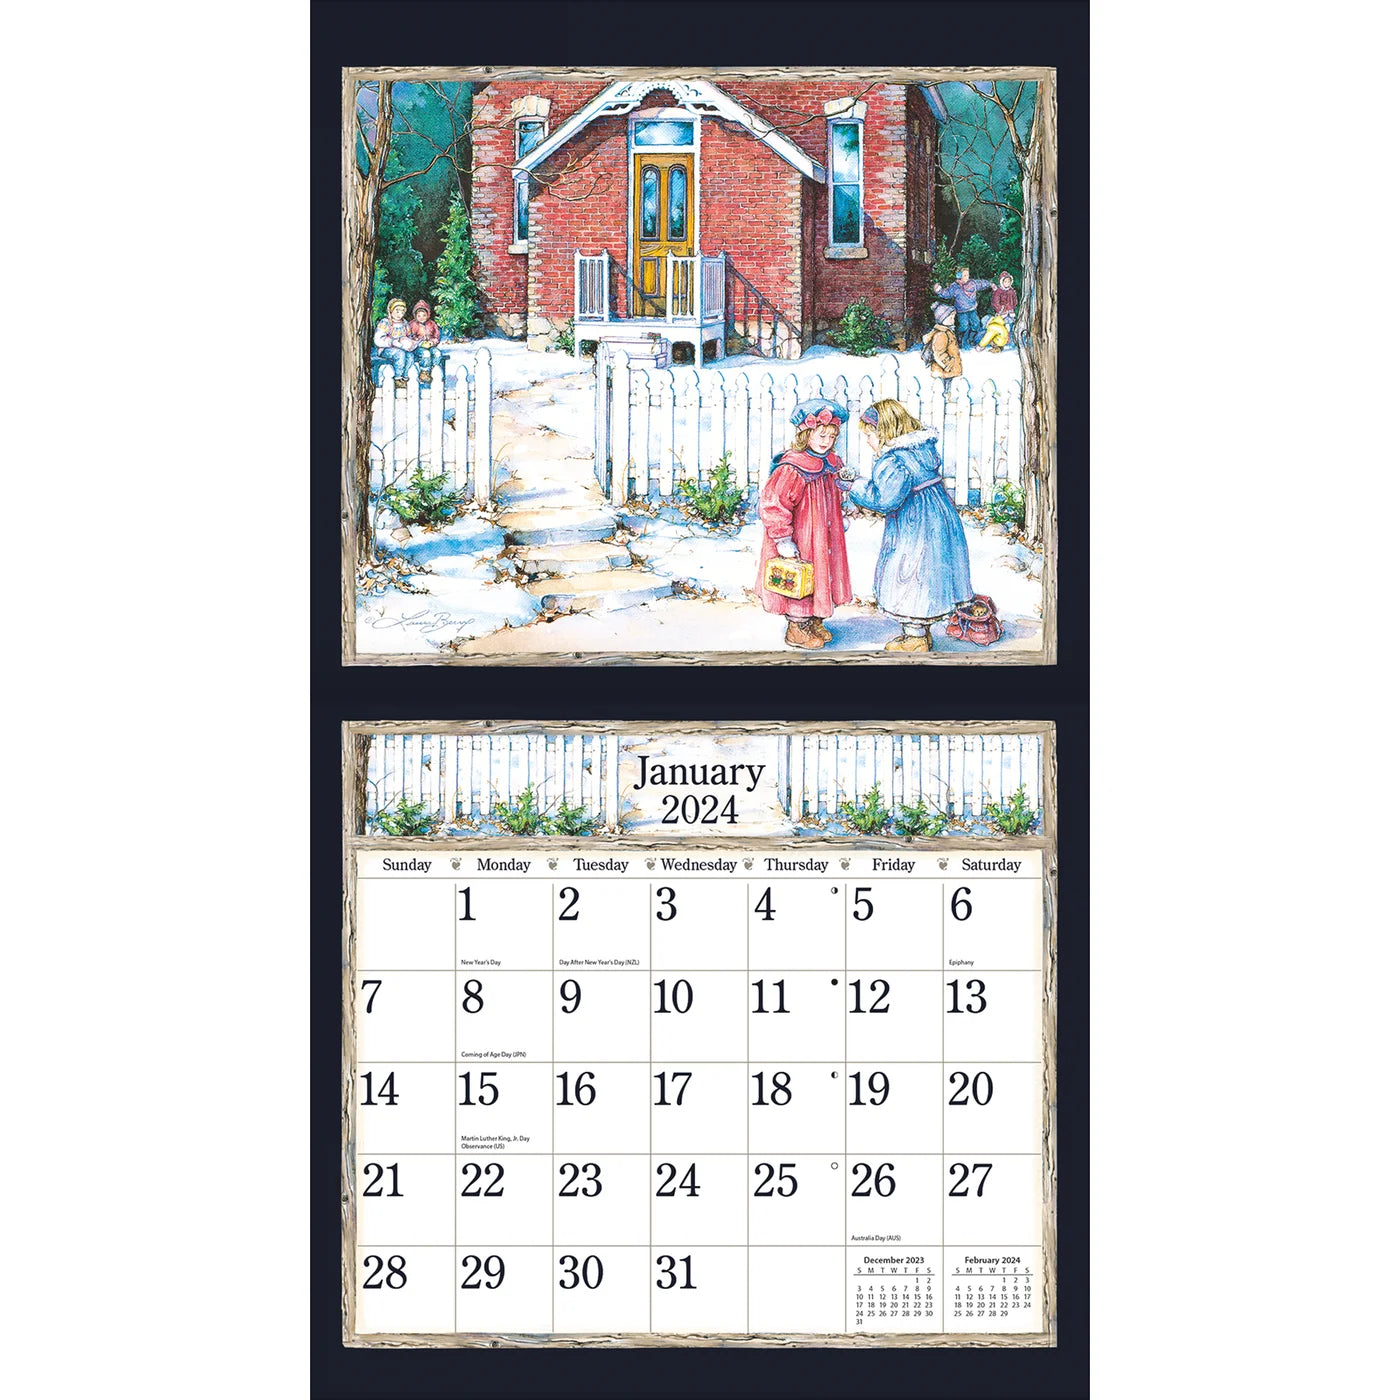 2024 LANG Country Welcome By Laura Berry - Deluxe Wall Calendar